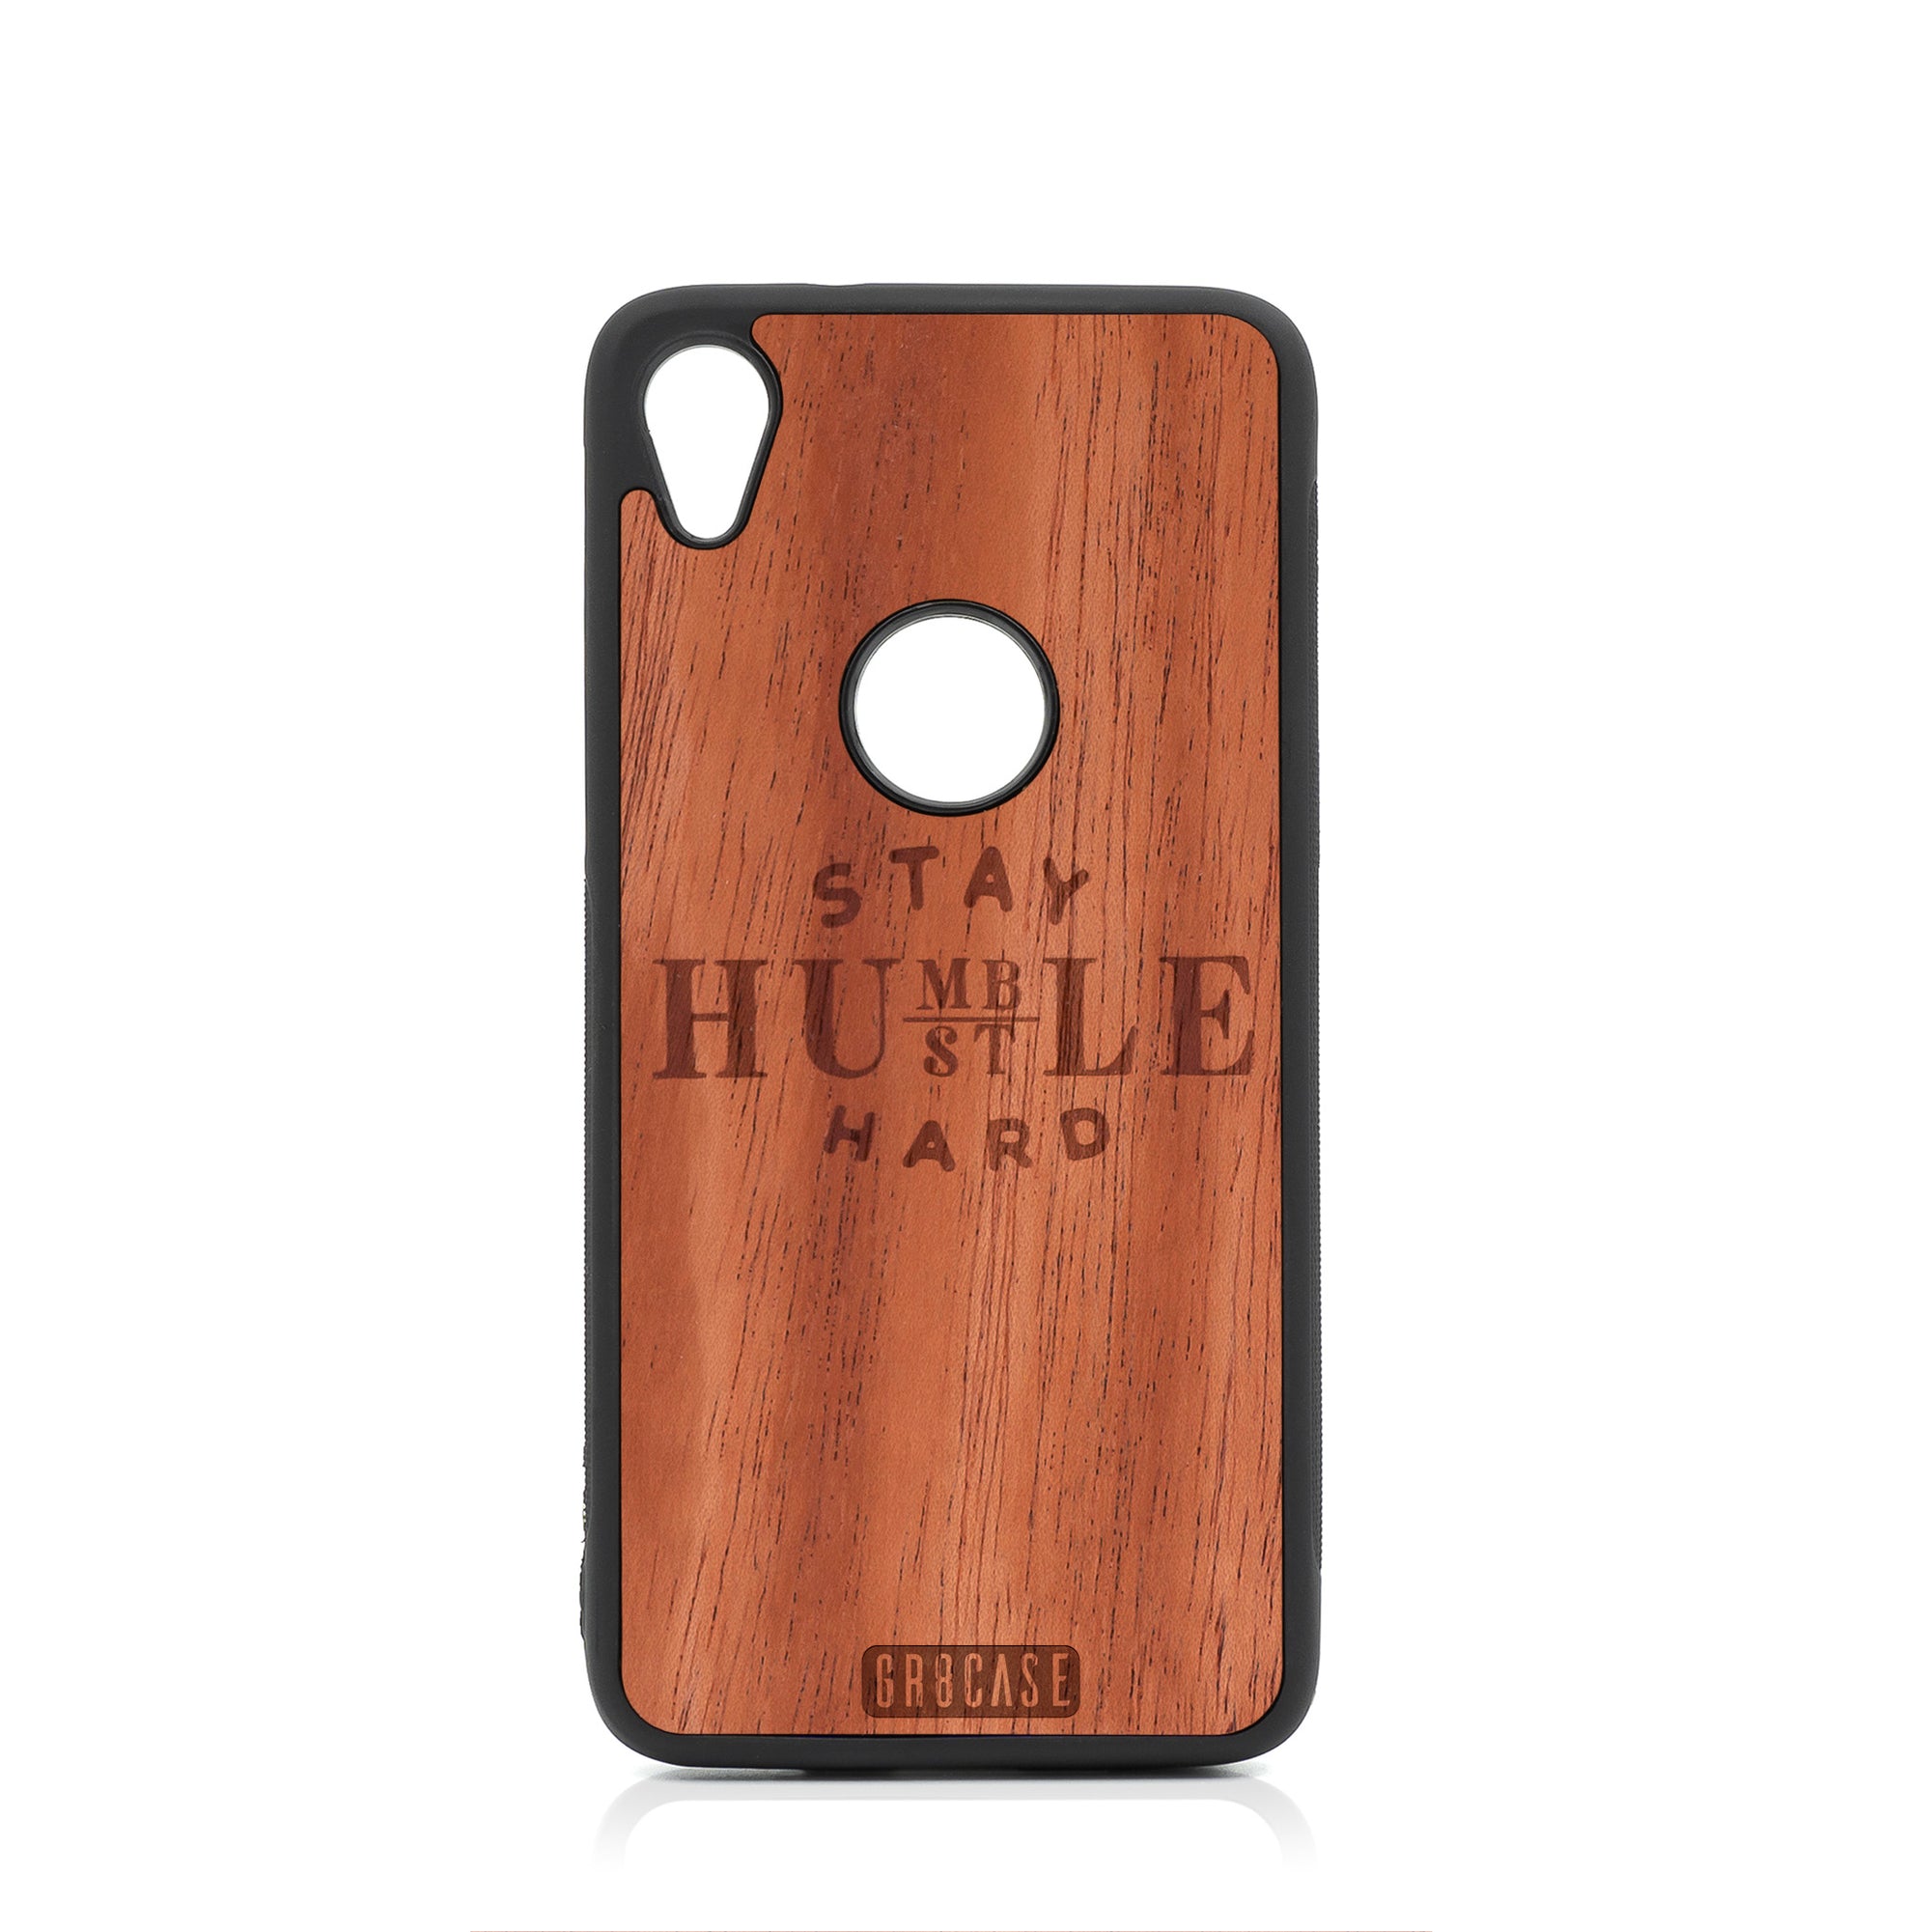 Stay Humble Hustle Hard Design Wood Case For Moto E6 by GR8CASE